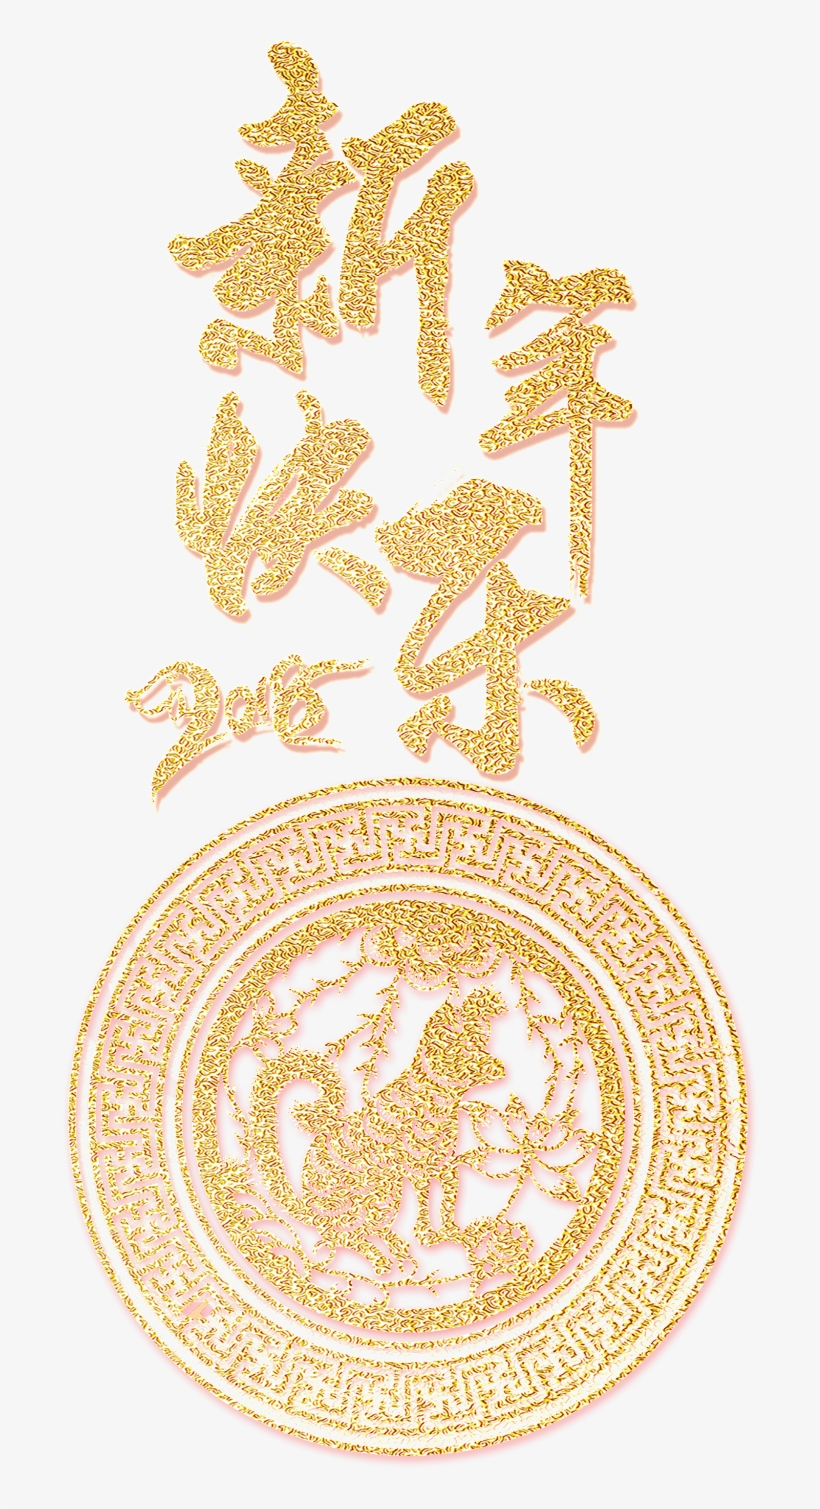 Golden 2018 Happy New Year Word Art - Redjuanshop Year Of The Dog Watch | Chinese Zodiac, transparent png #26552